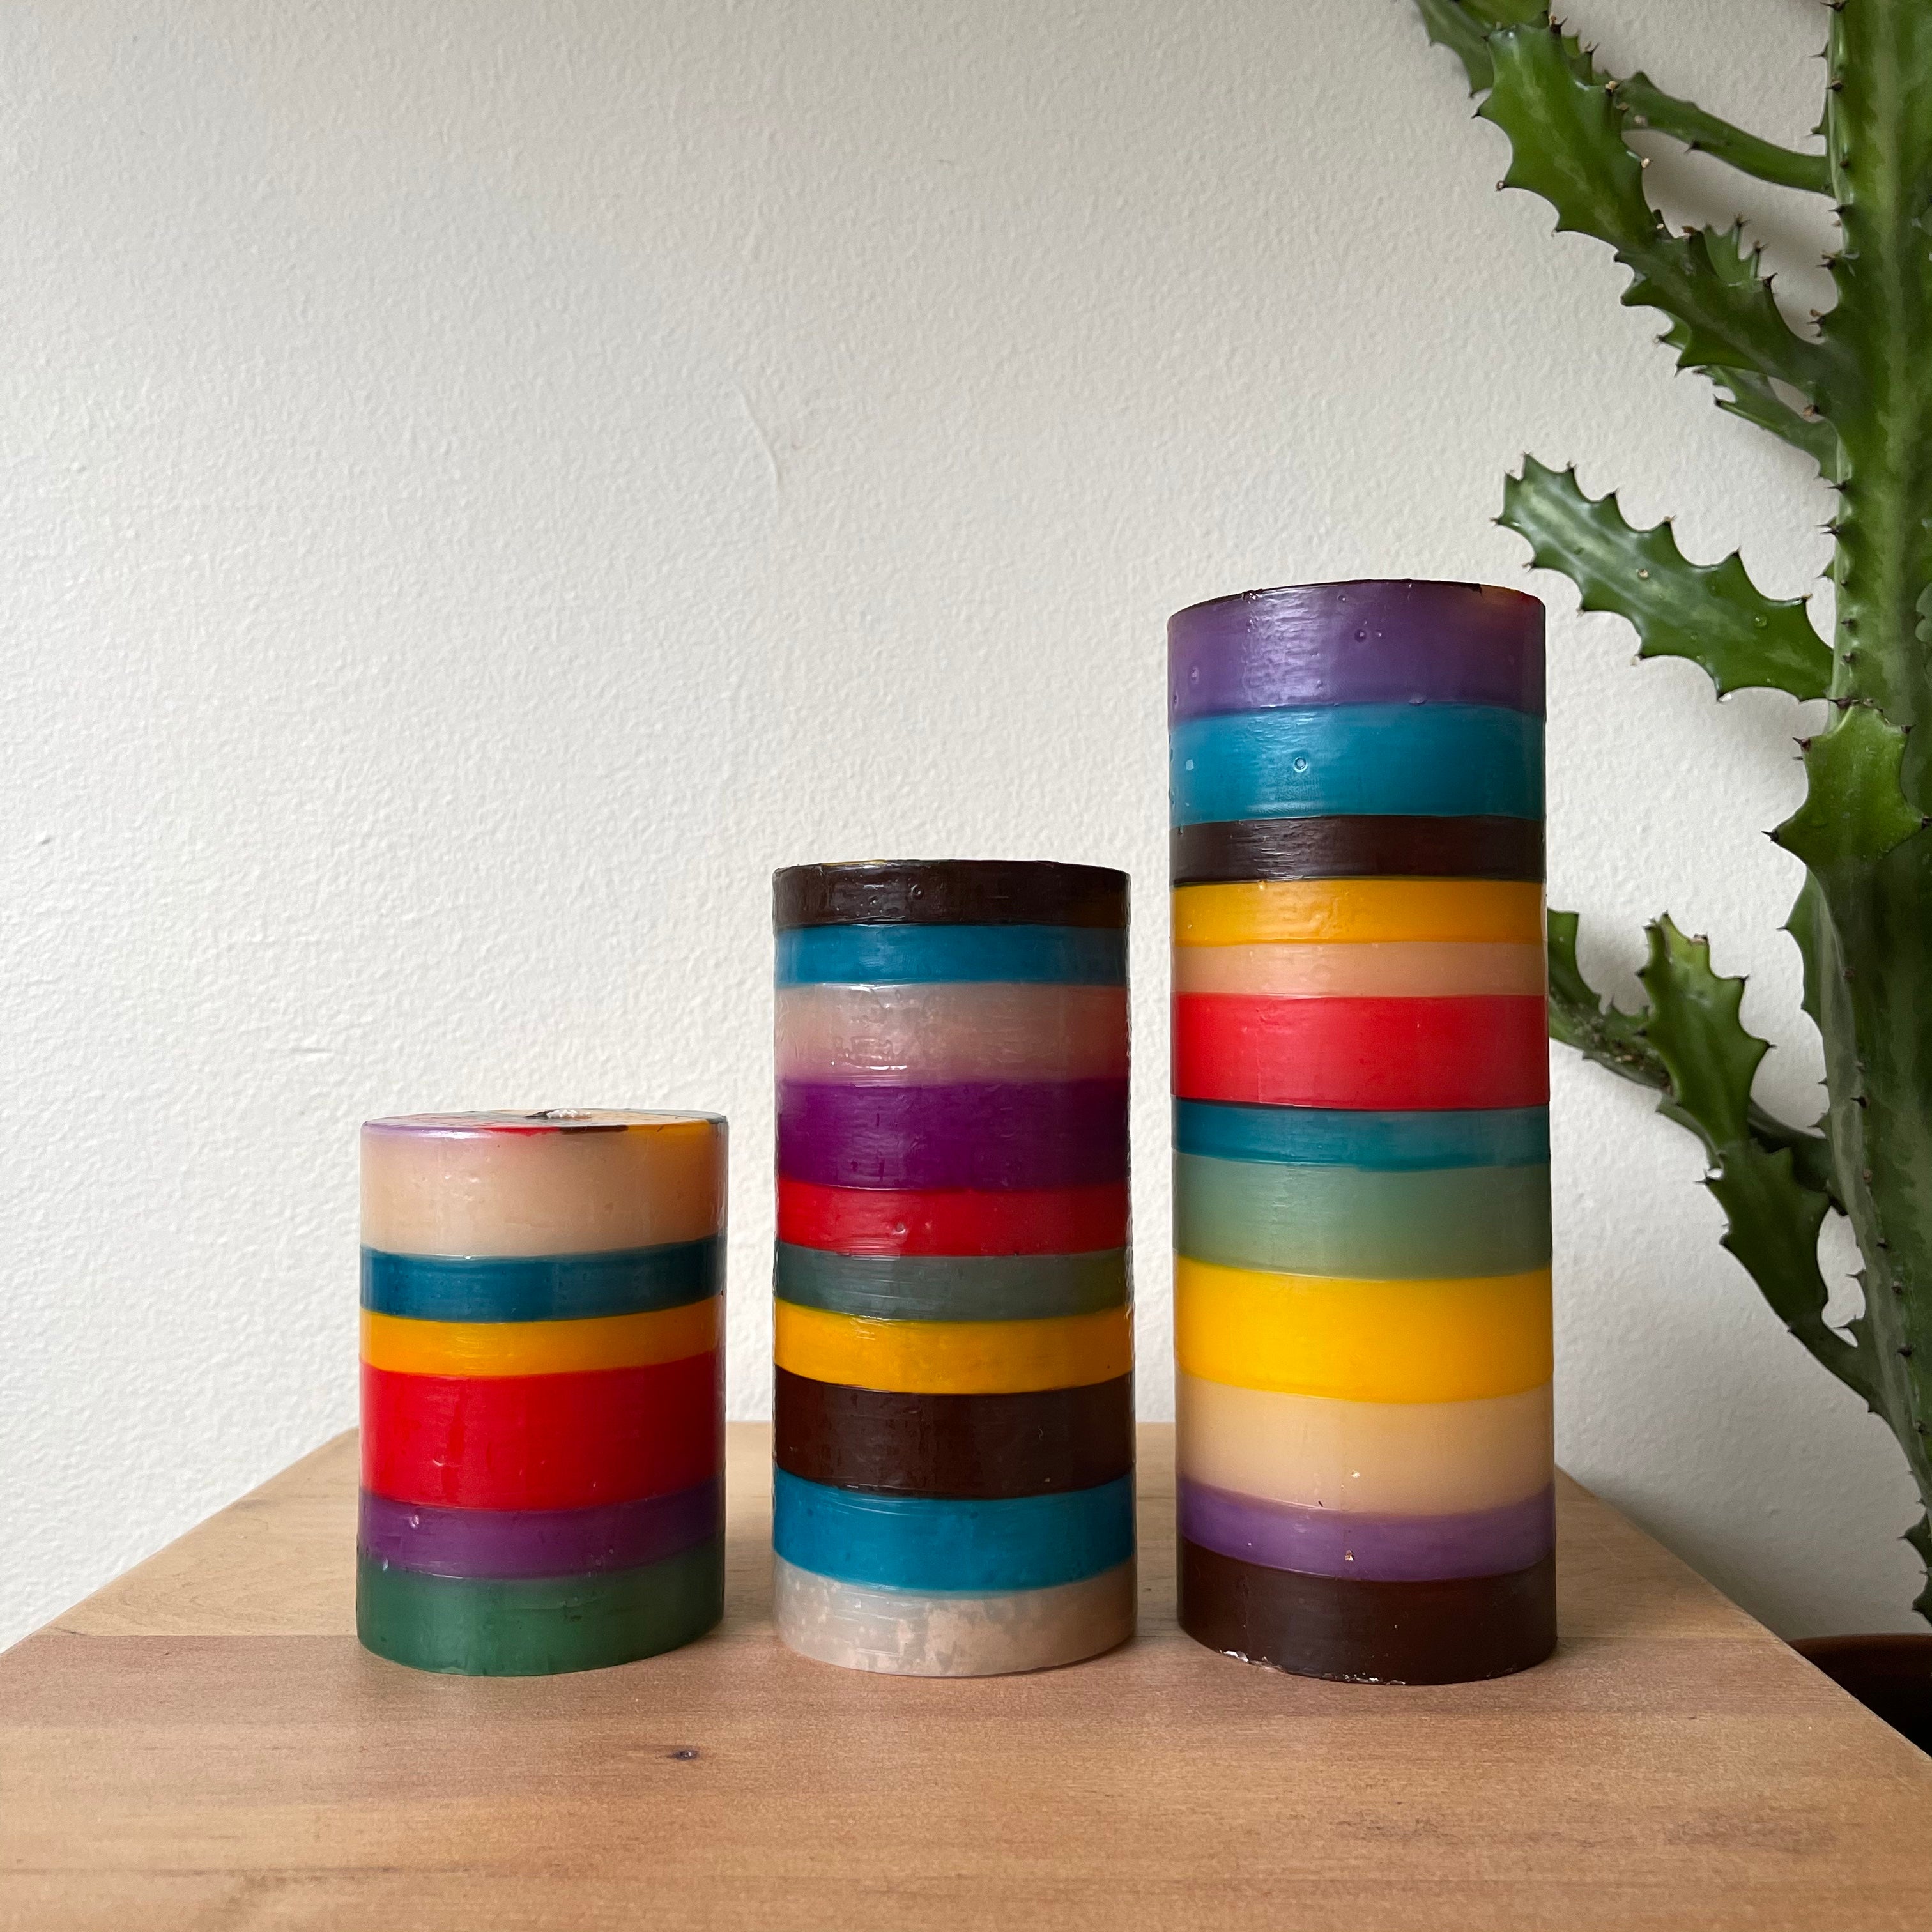 Memphis Stripe Candle collection pillar candles, 3x4 pillar candle, 3x6 pillar candle, and 3x8 pillar candle.  Painted in stripes of purple, turquoise, brown, yellow, green & red.  Fair Trade home decor.